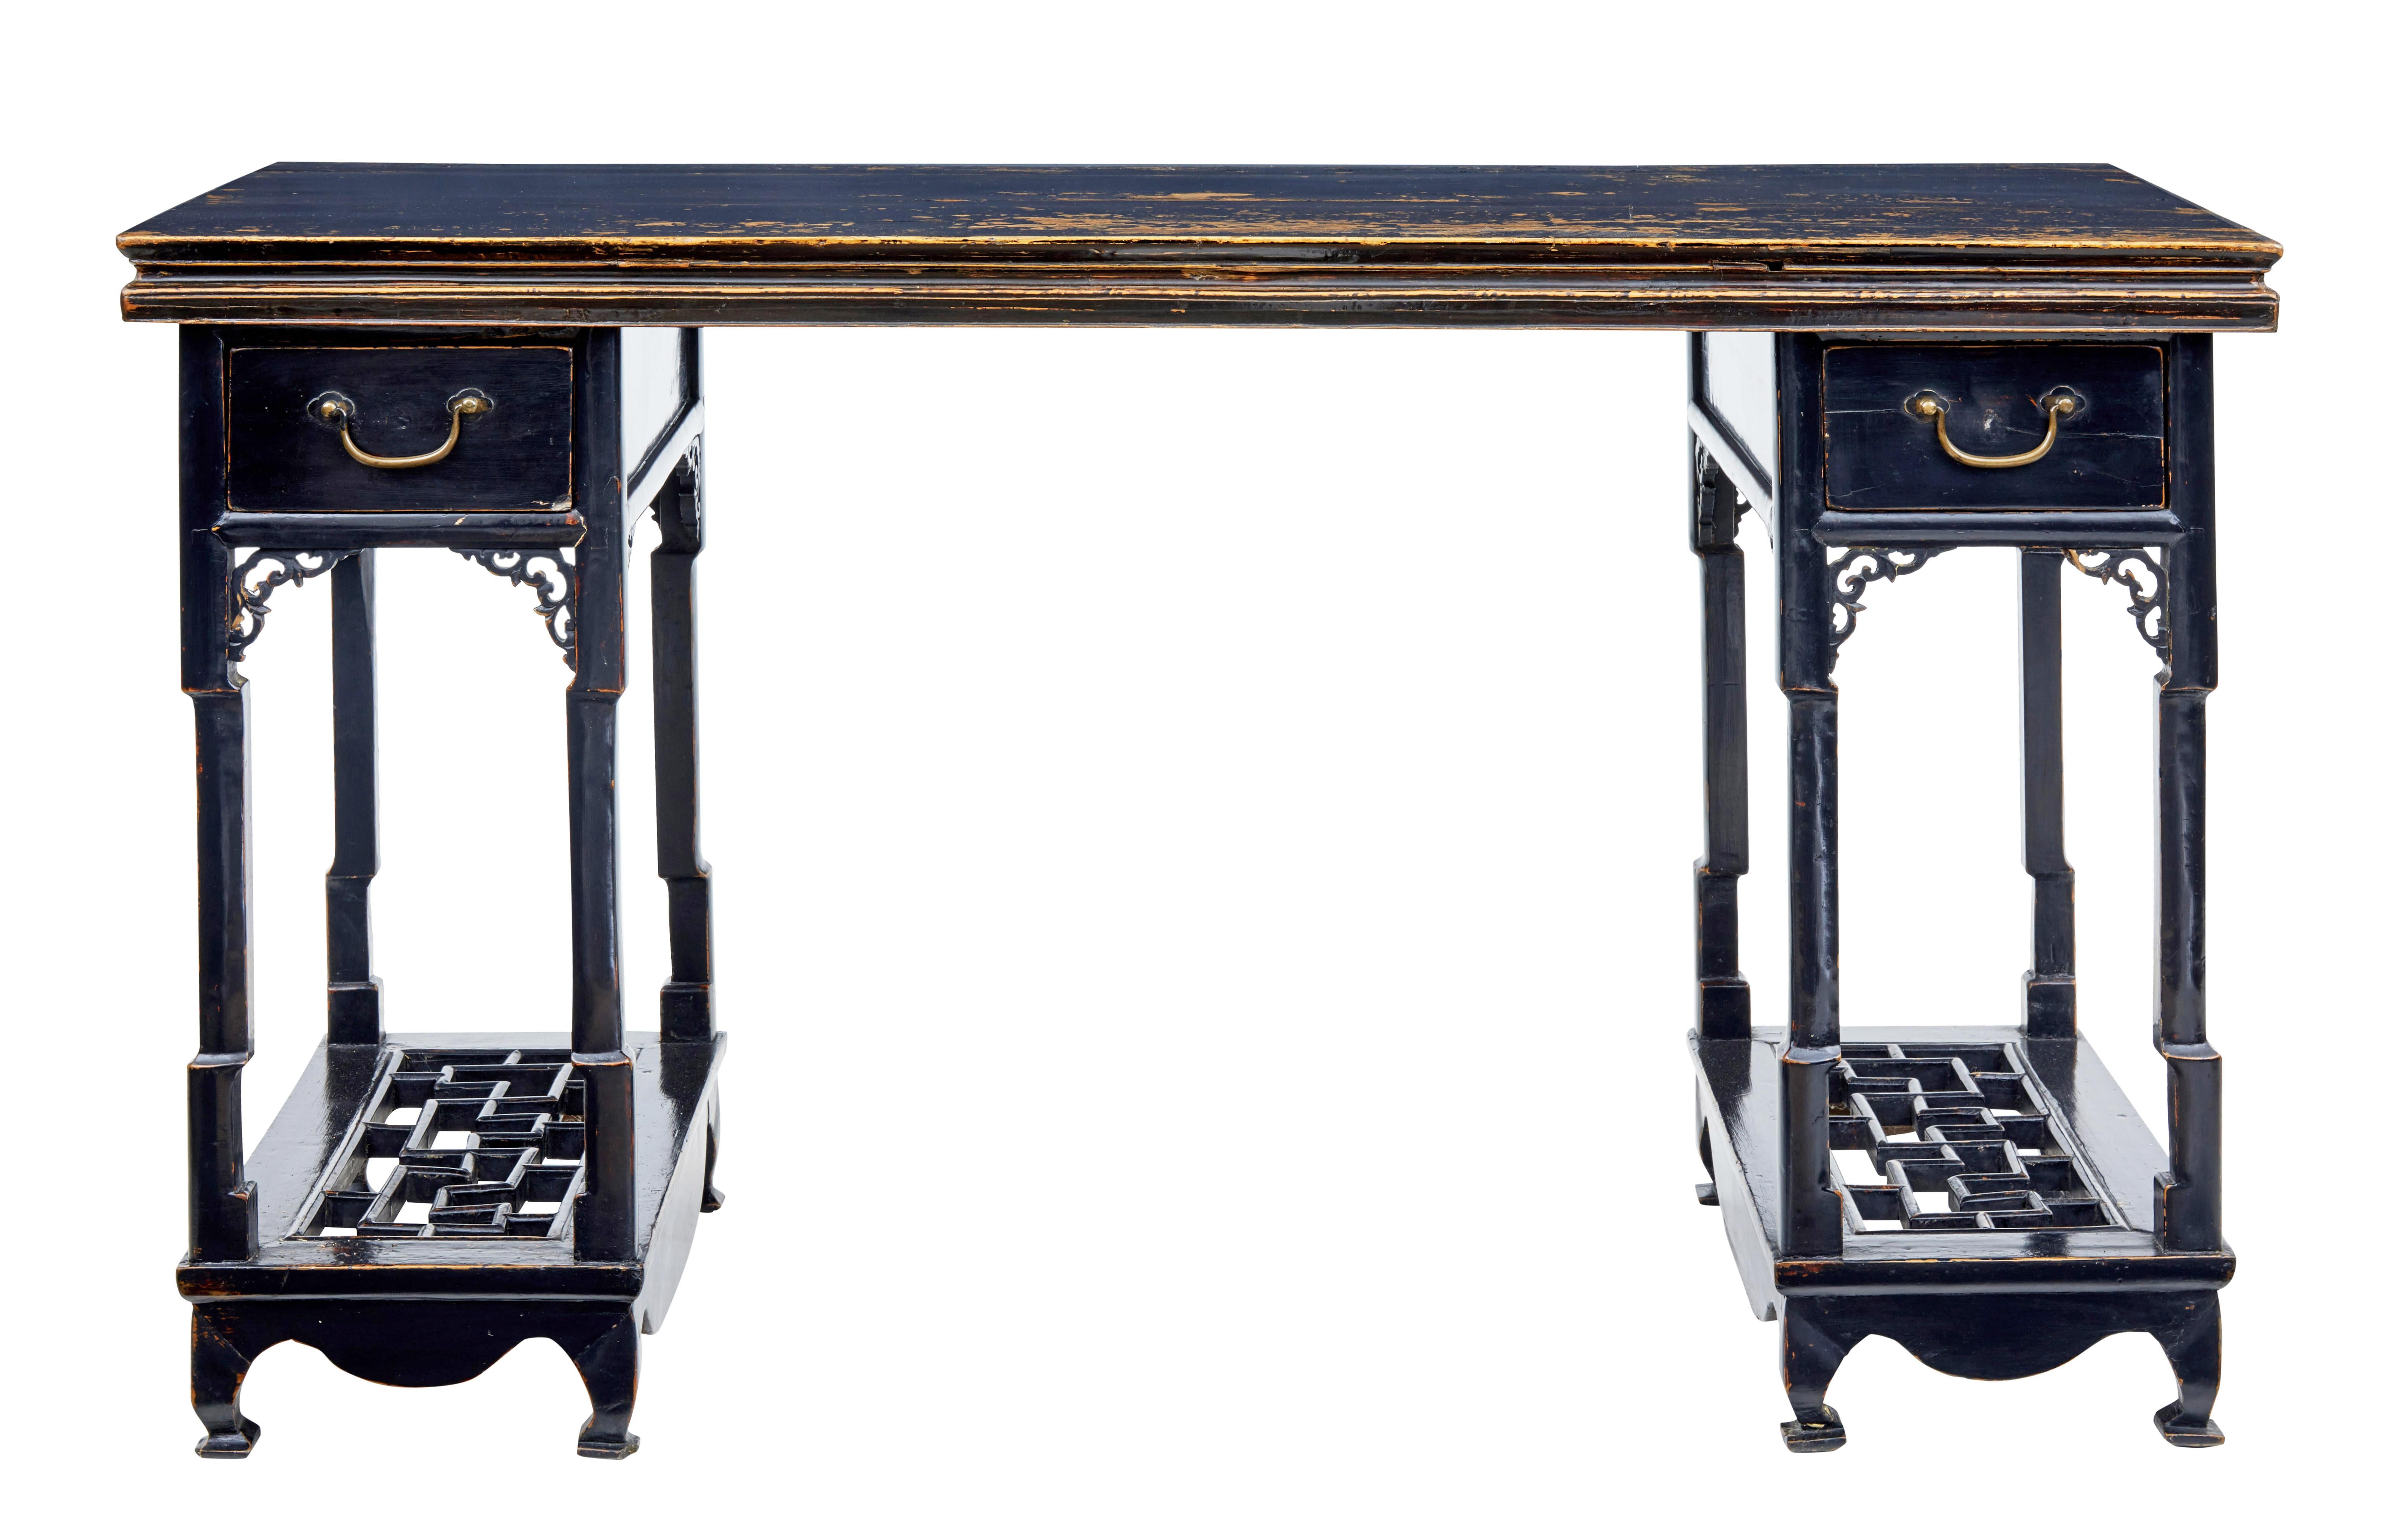 19th century Chinese black lacquered desk, circa 1880.

Comprising of 3 parts, 2 pedestals and top surface. Presented in black lacquer which has worn through.

Now useful as a desk with a drawer in each pedestal and lower pierced carved shelf.